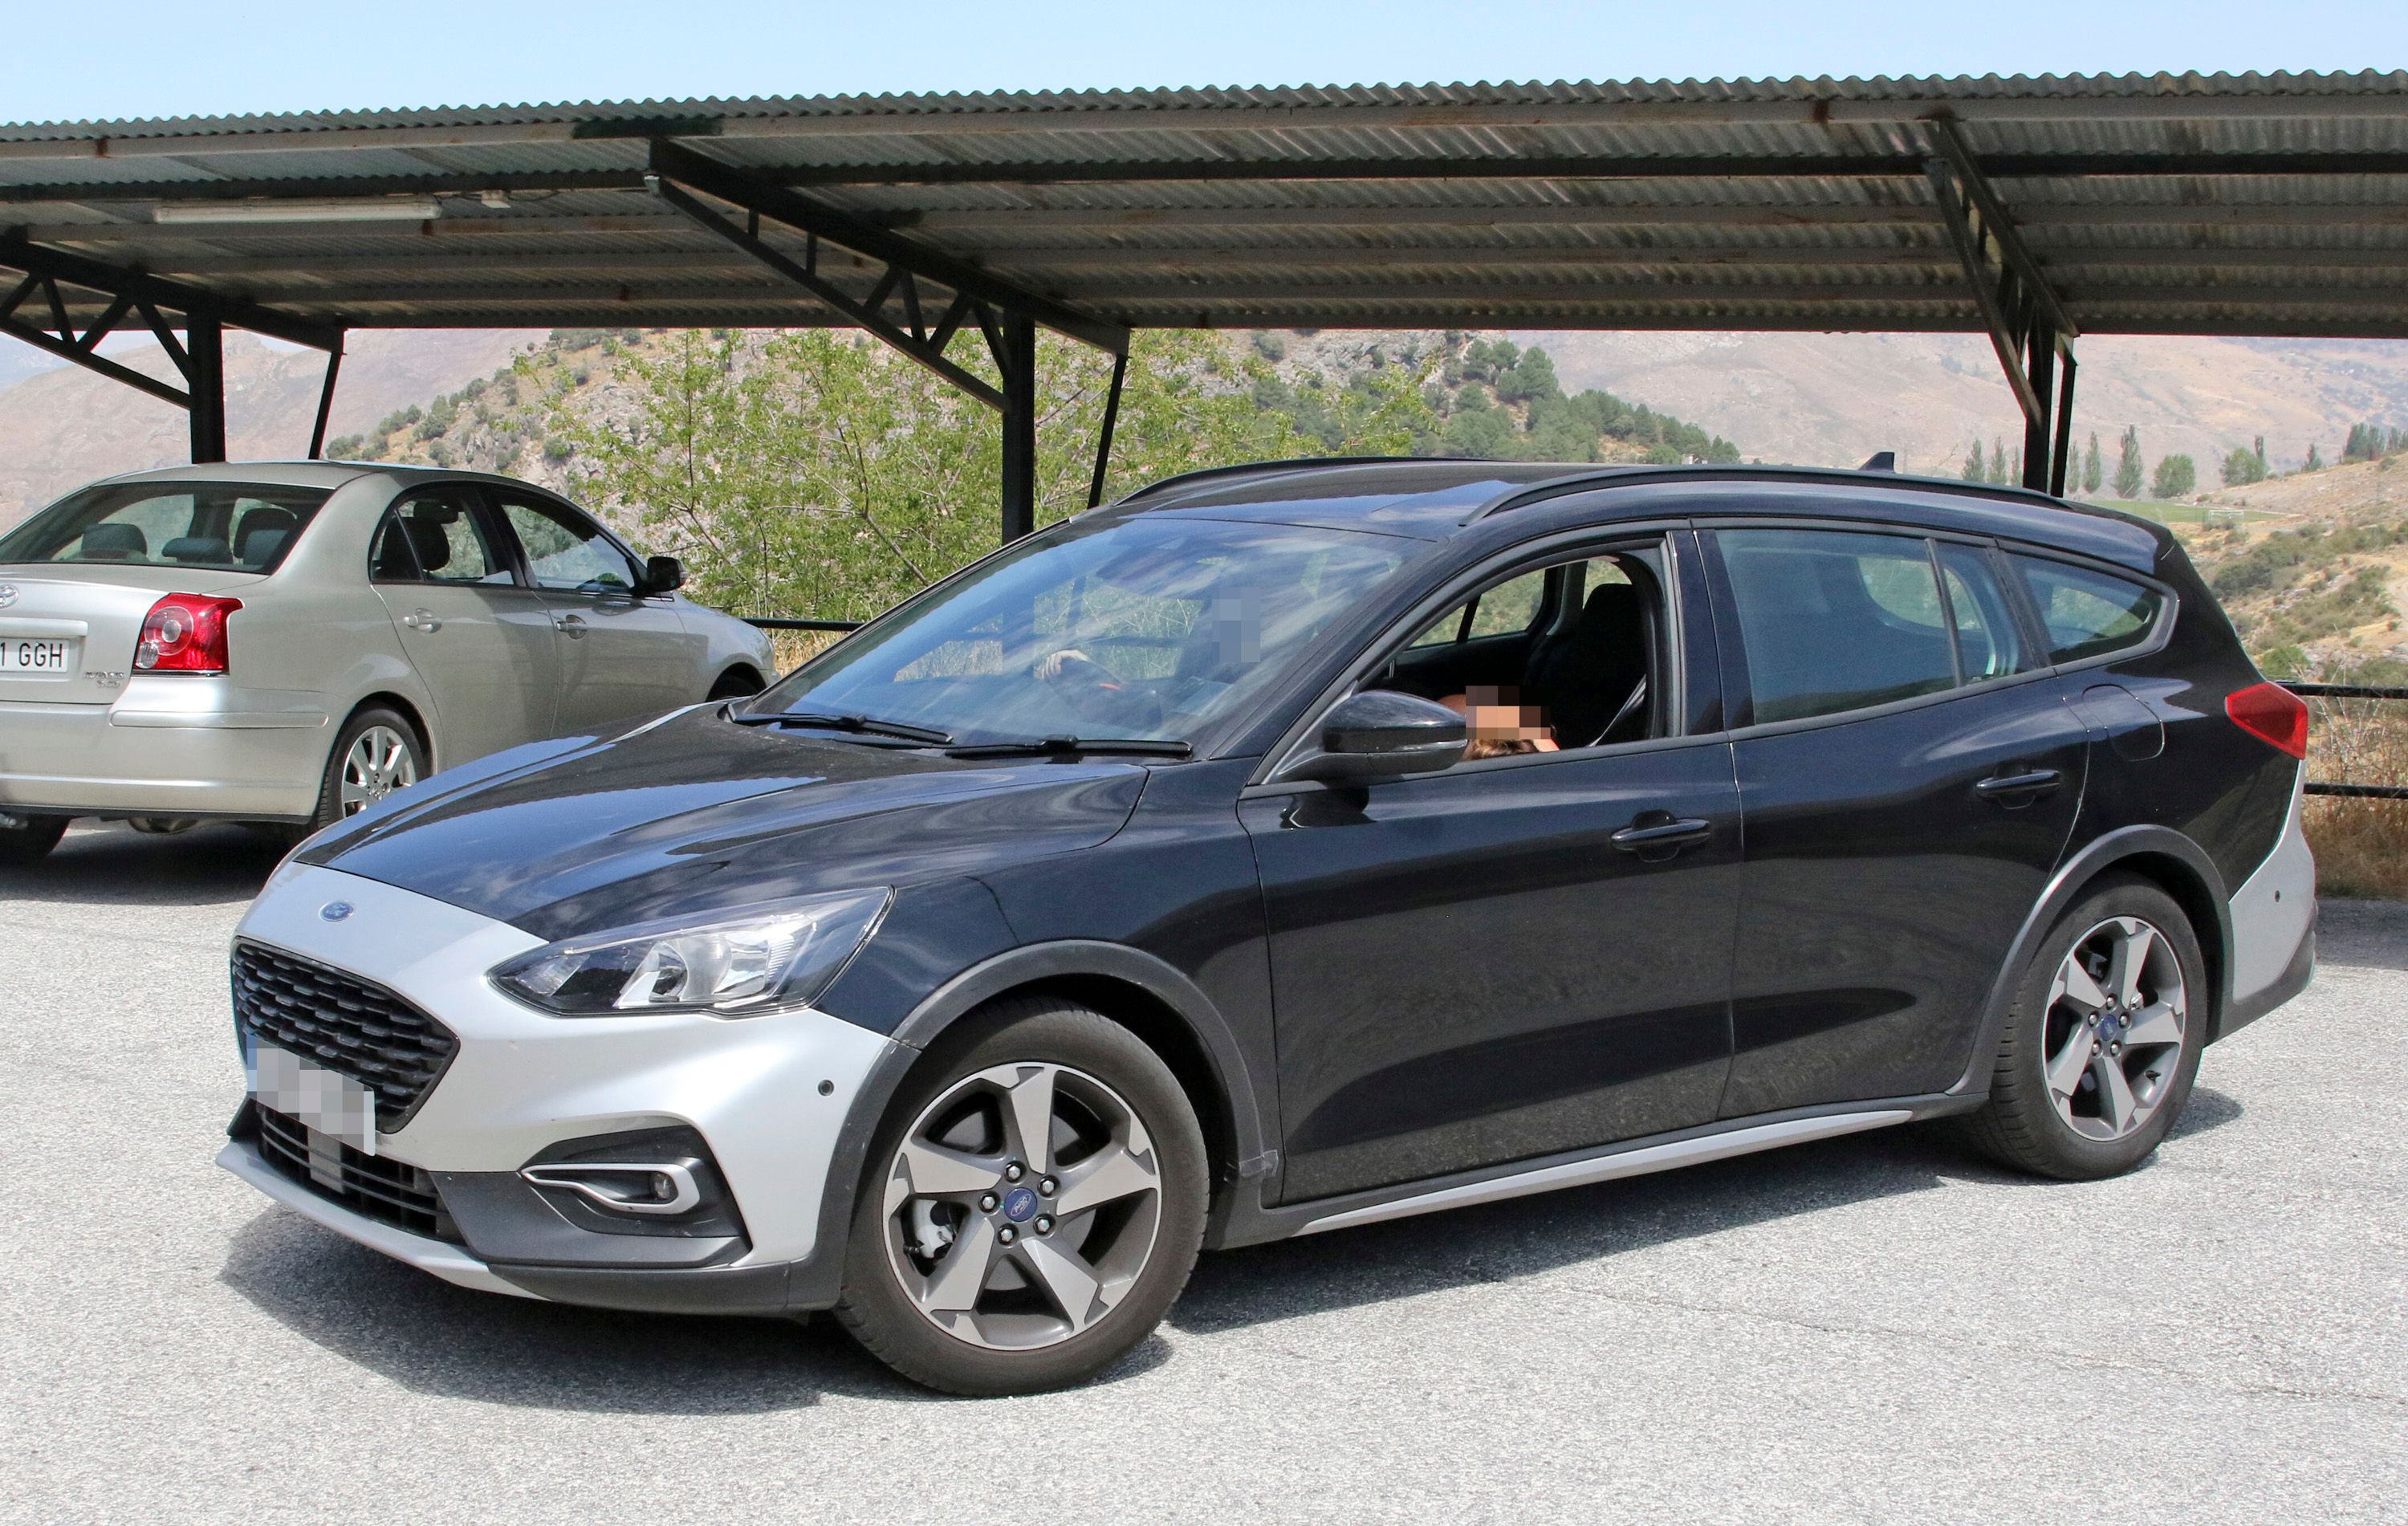 2019 Ford Focus Active Wagon